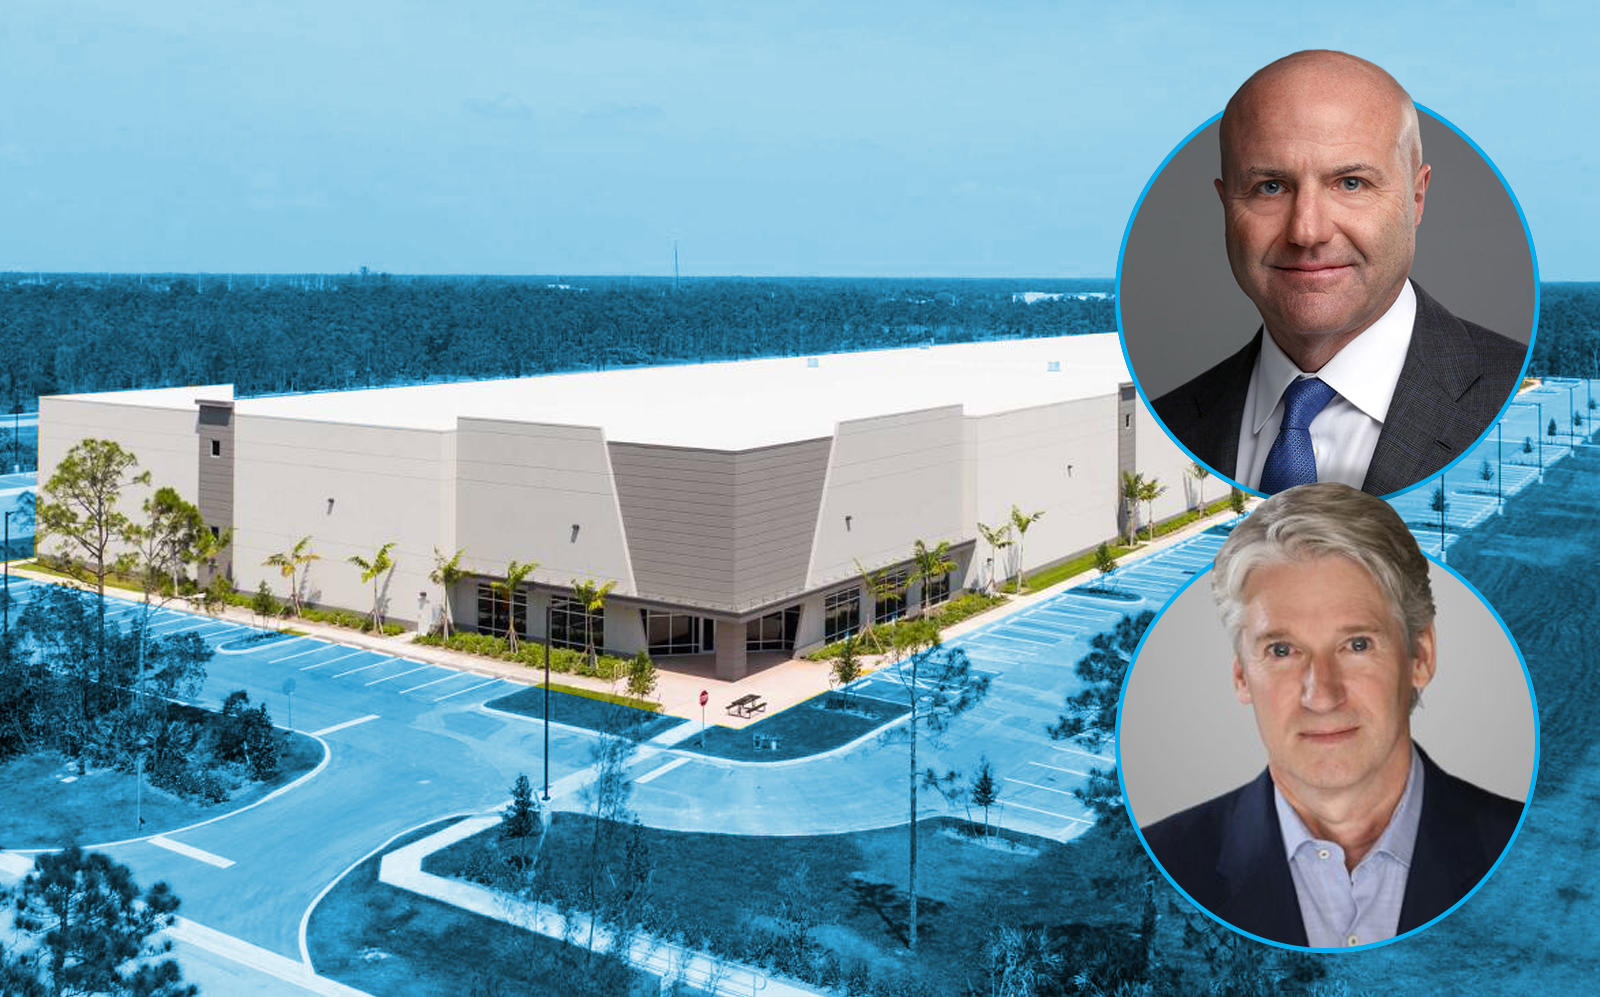 TPA's J. Bradford Smith, MDH's Jeff Small Jr, and 15335 Park of Commerce blvd (TPA, MDH, Crexi)